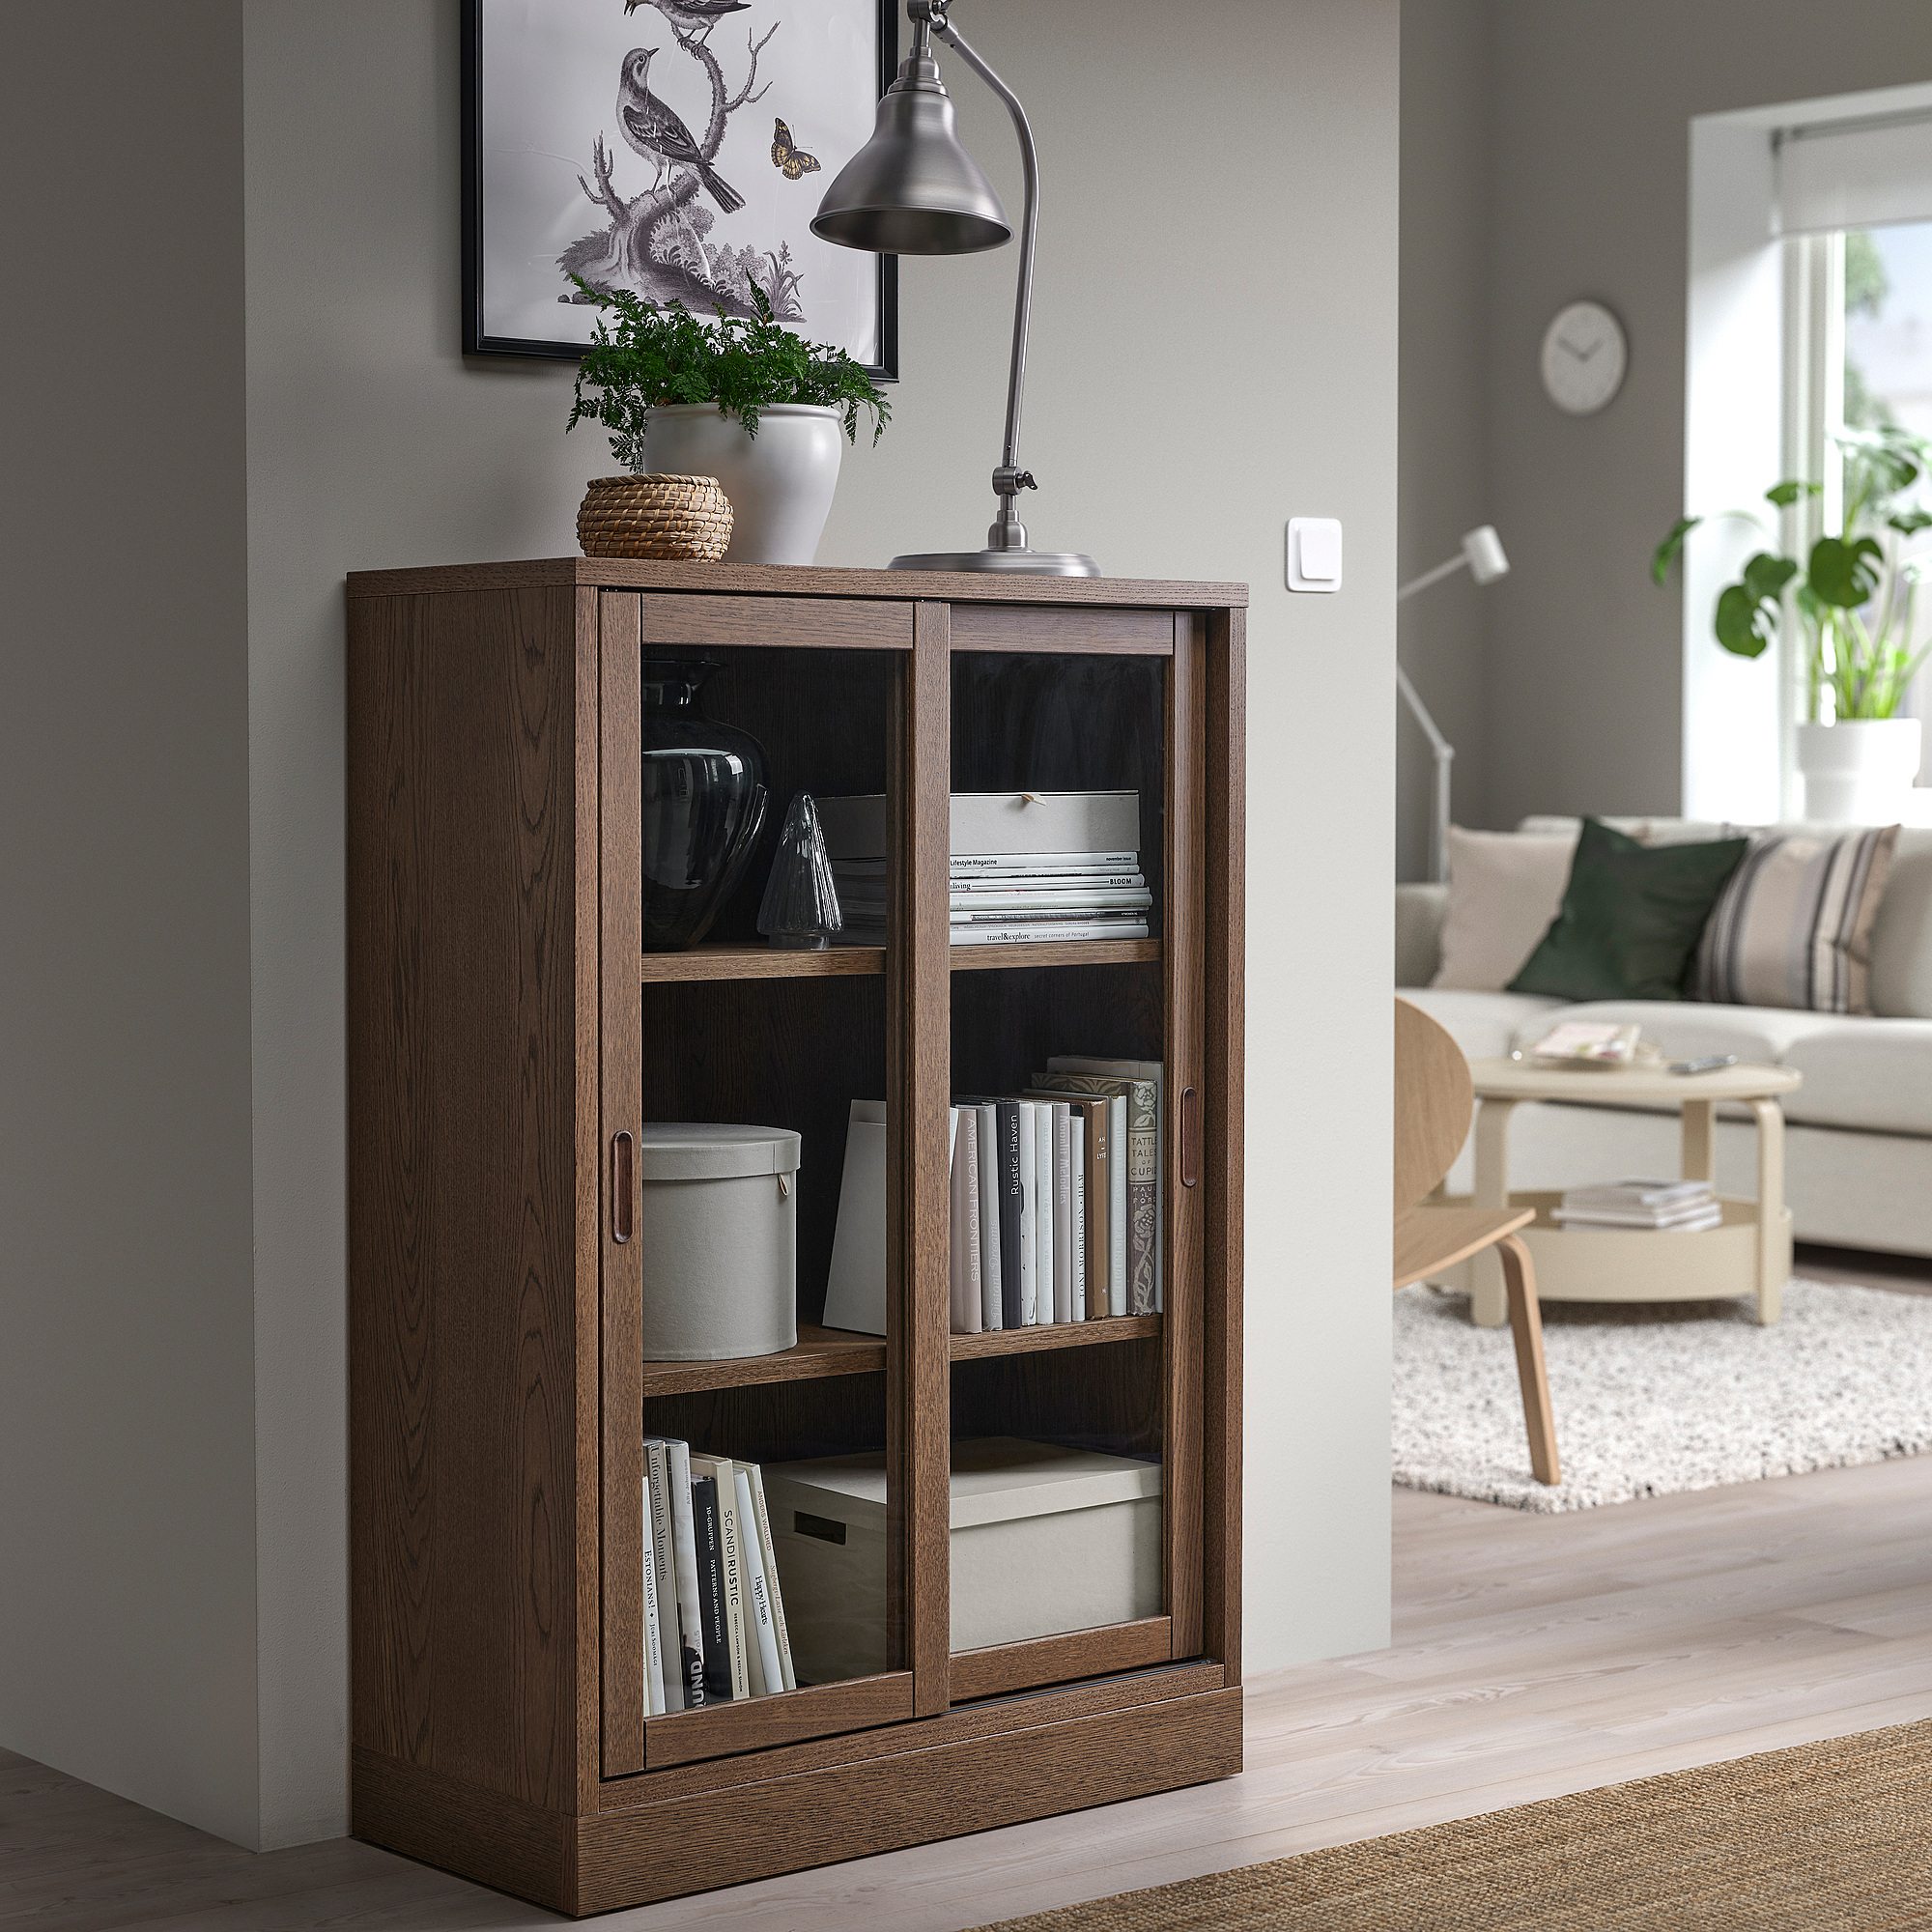 TONSTAD cabinet with sliding glass doors